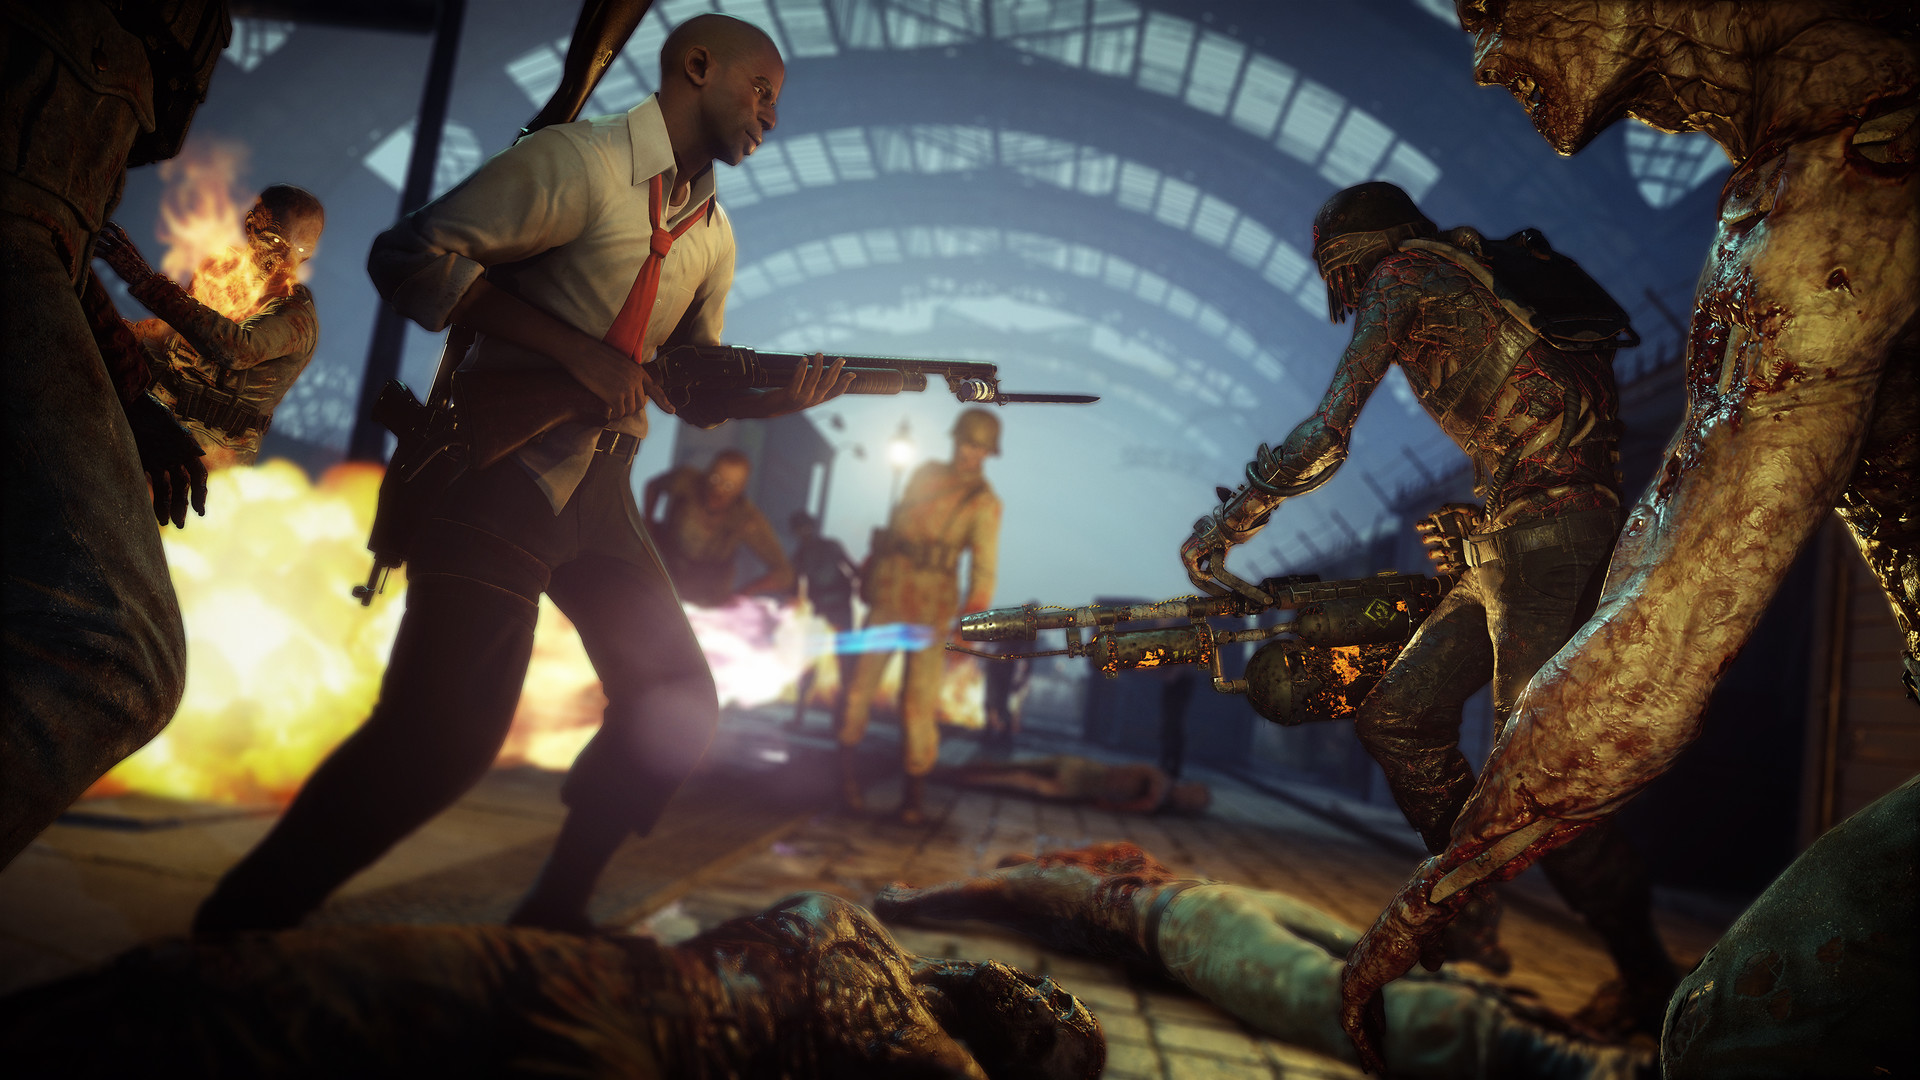 Left 4 Dead Characters Join Zombie Army 4: Dead War in Free New